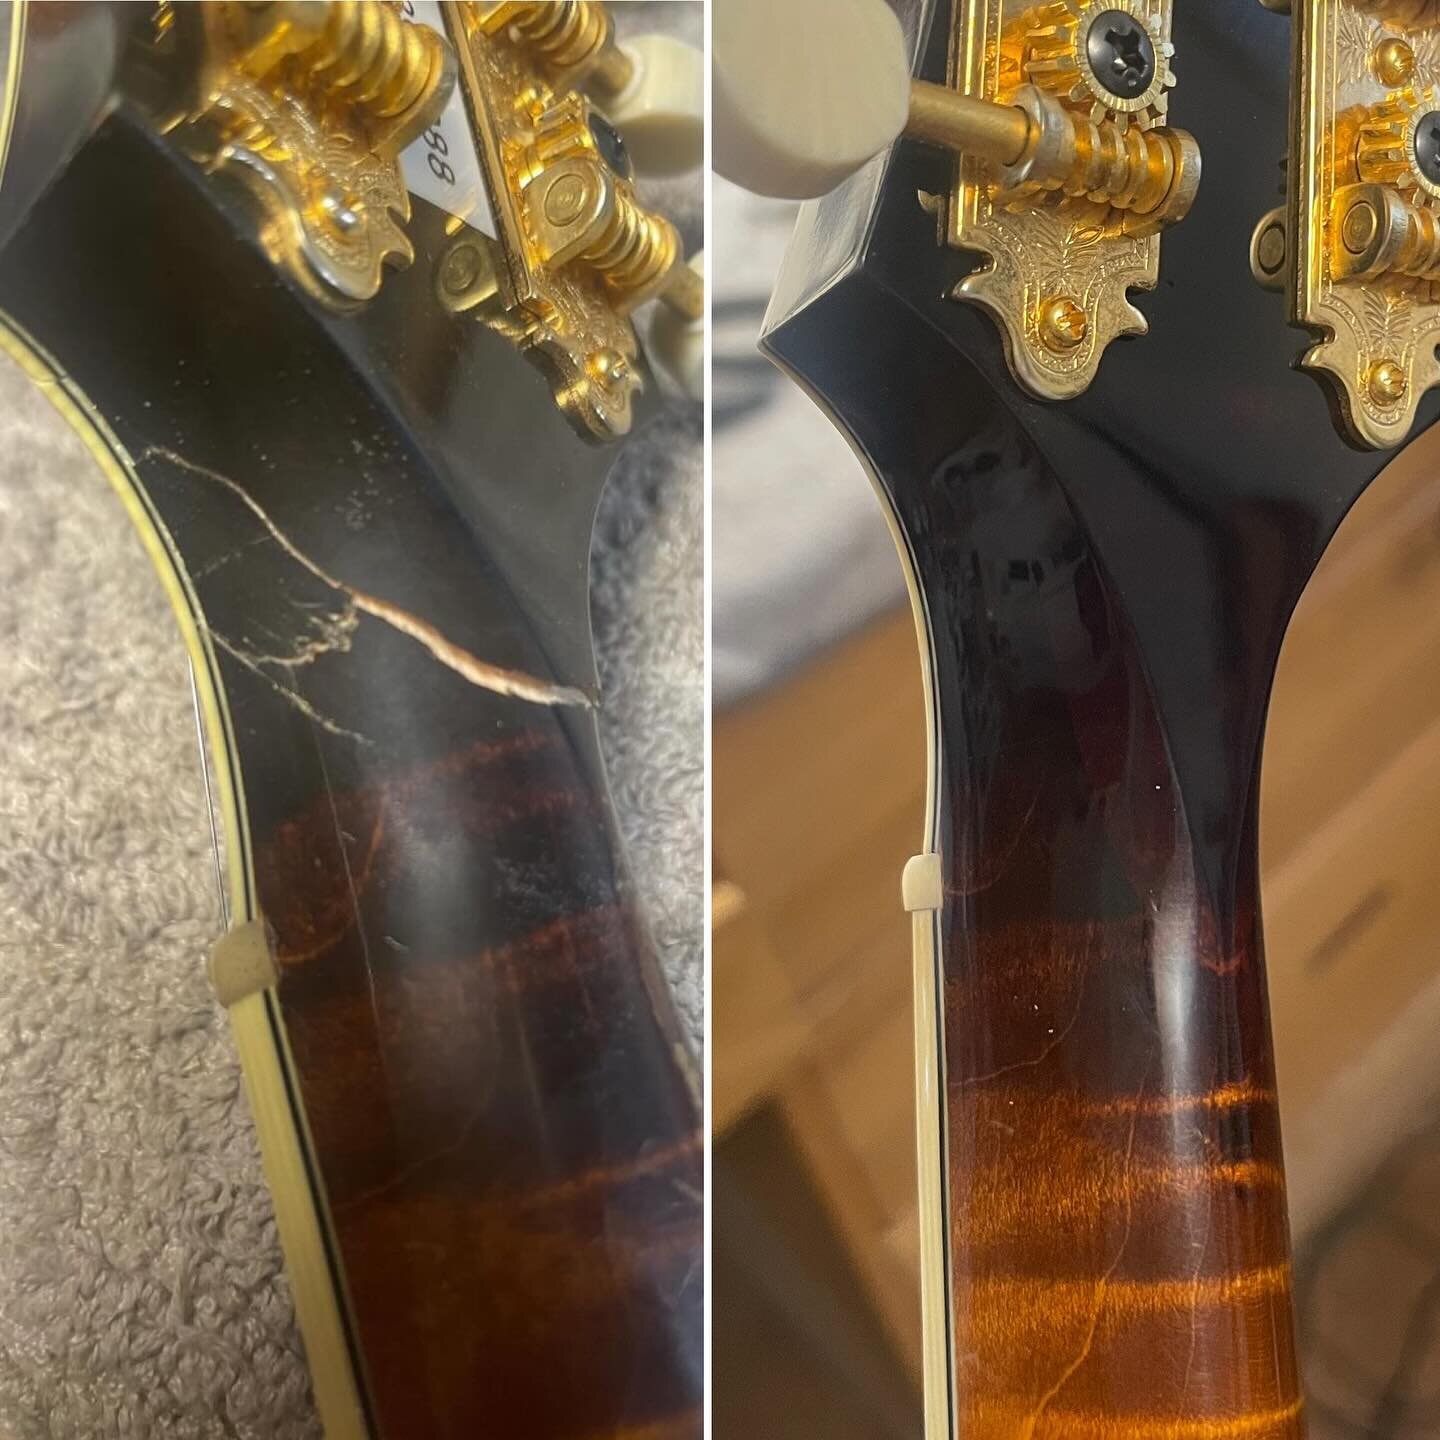 Collings MF5 headstock repair.
-
Broken headstock from falling off of a stand on stage 😩&hellip; I glued it back together with GFlex epoxy, added a flame maple splint, carved it back into shape, and did a lot of lacquer work.  I also gave it a refre